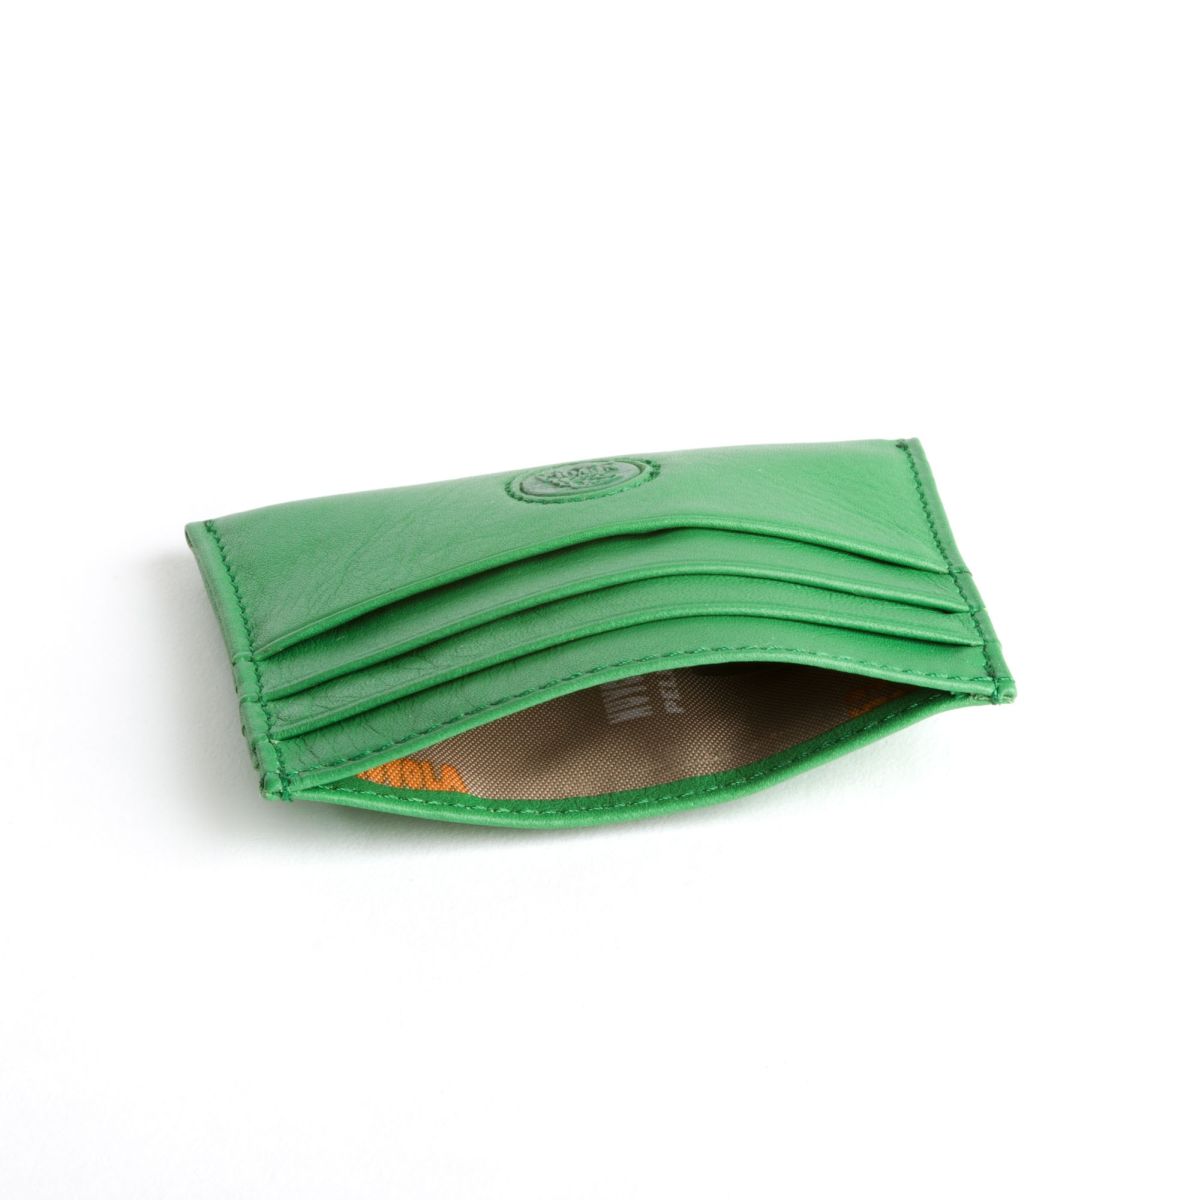 NUVOLA PELLE Minimalist leather credit card wallet - Green